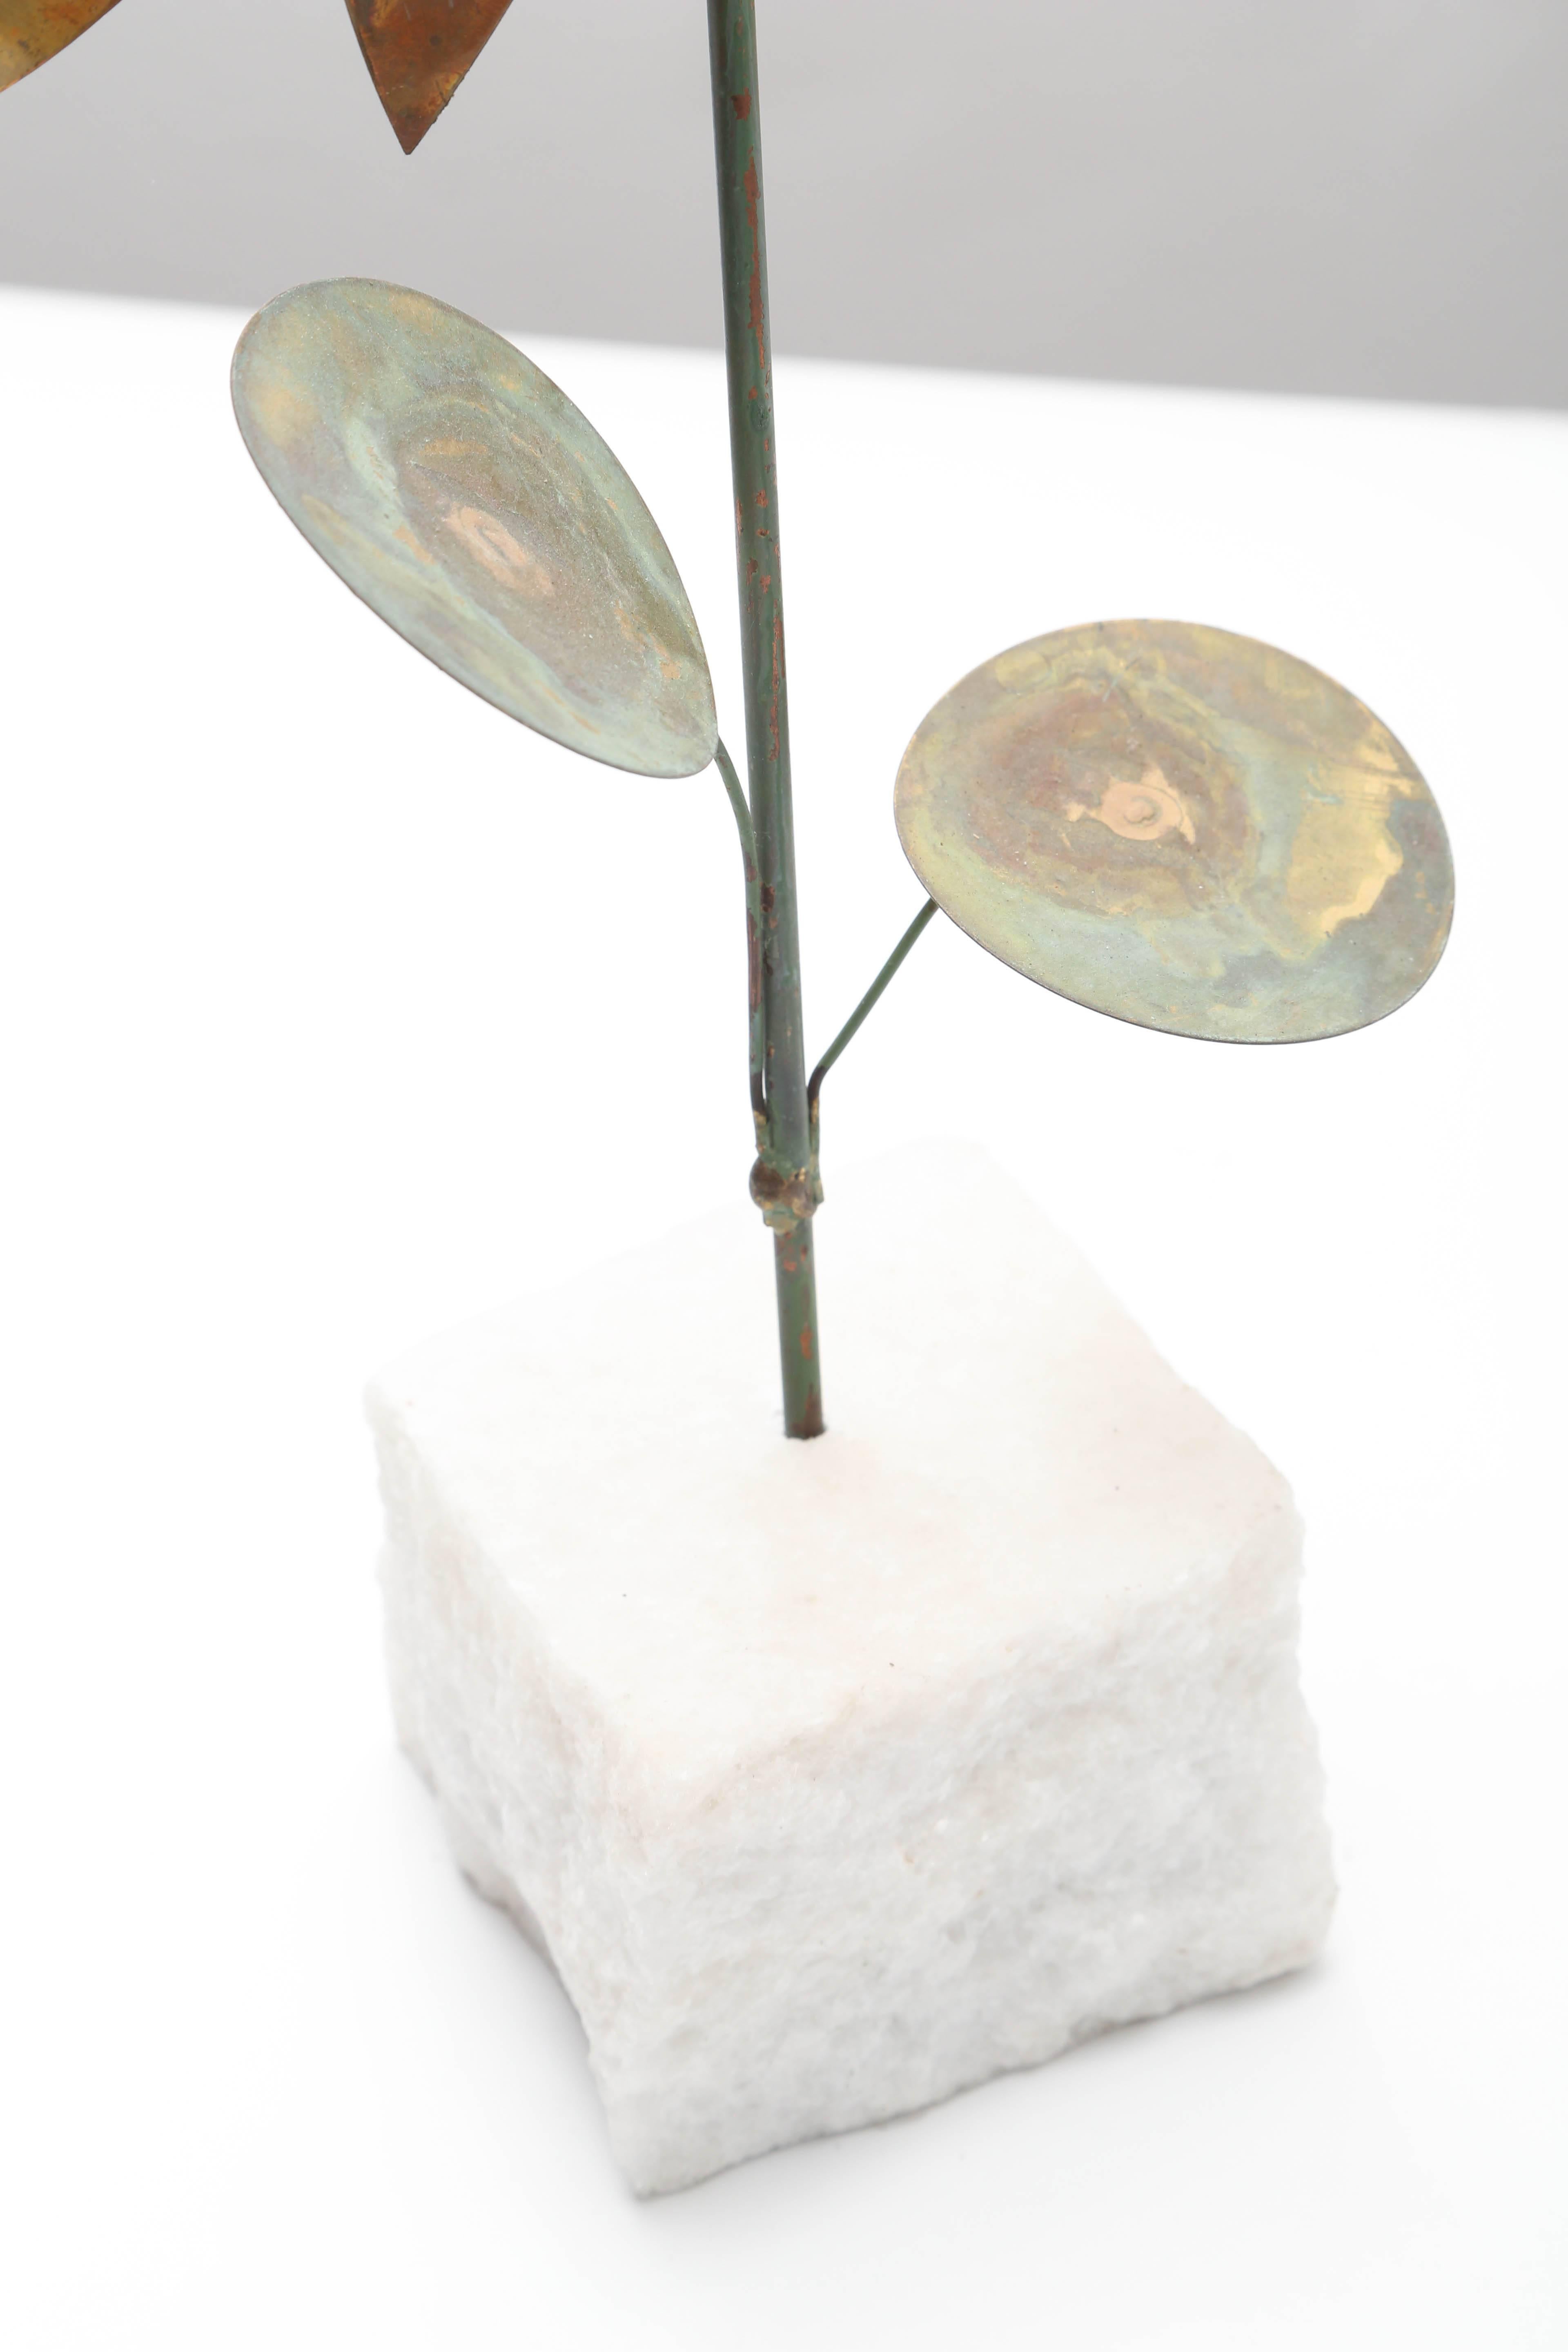 Cast Rare Signed Curtis Jere Copper and Resin Sunflower Sculpture, 1968